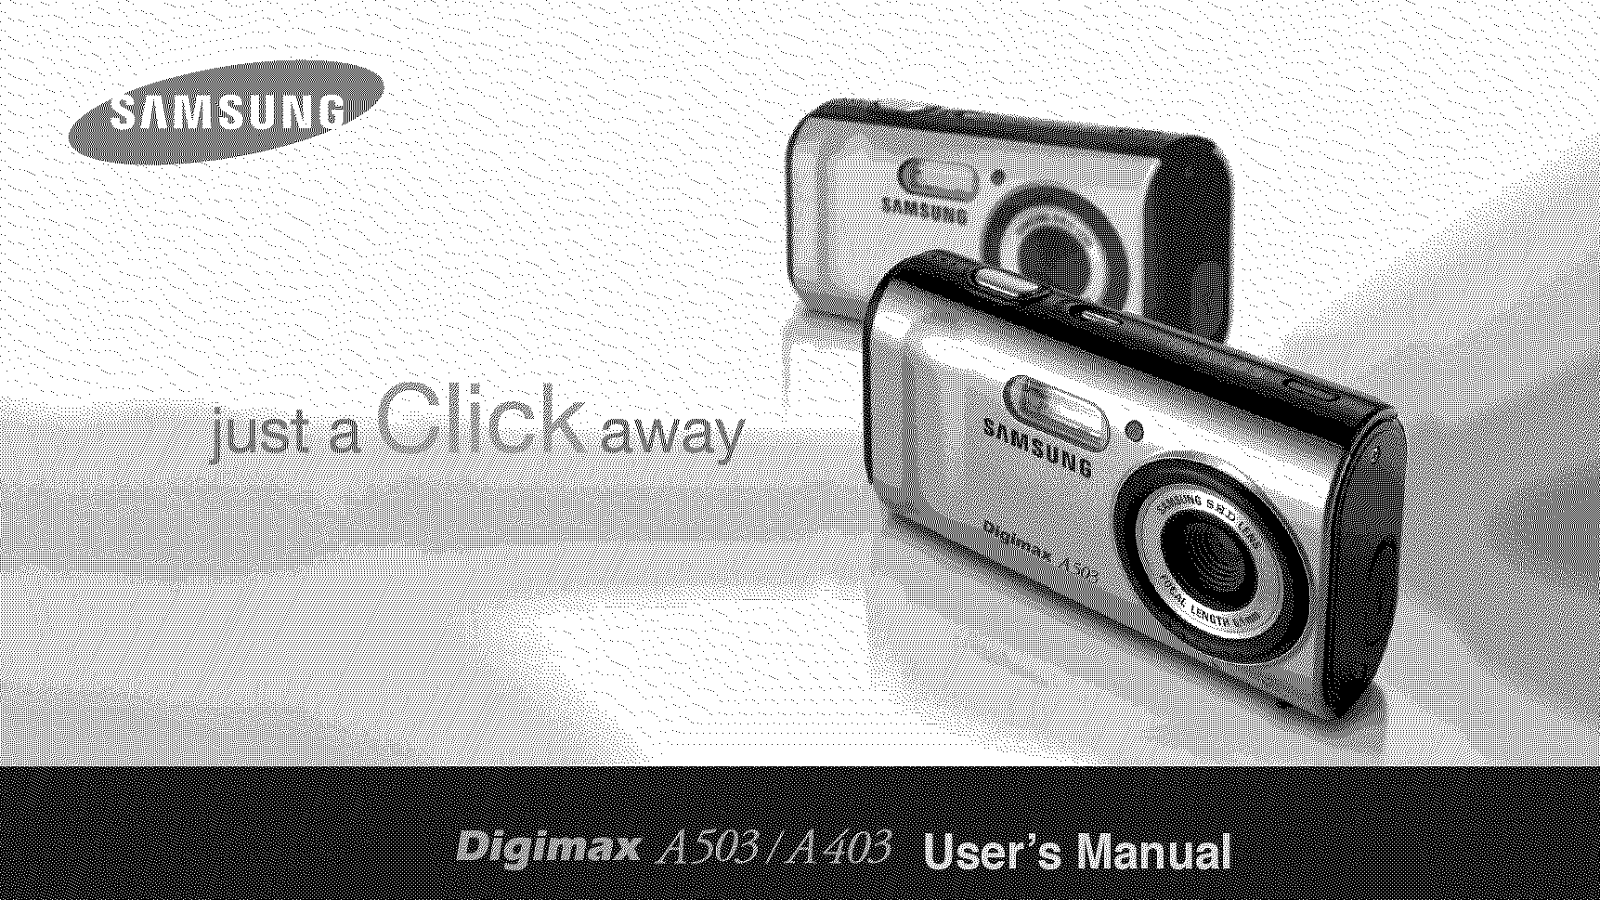 Samsung Digimax A503, Digimax A403 User's Guide